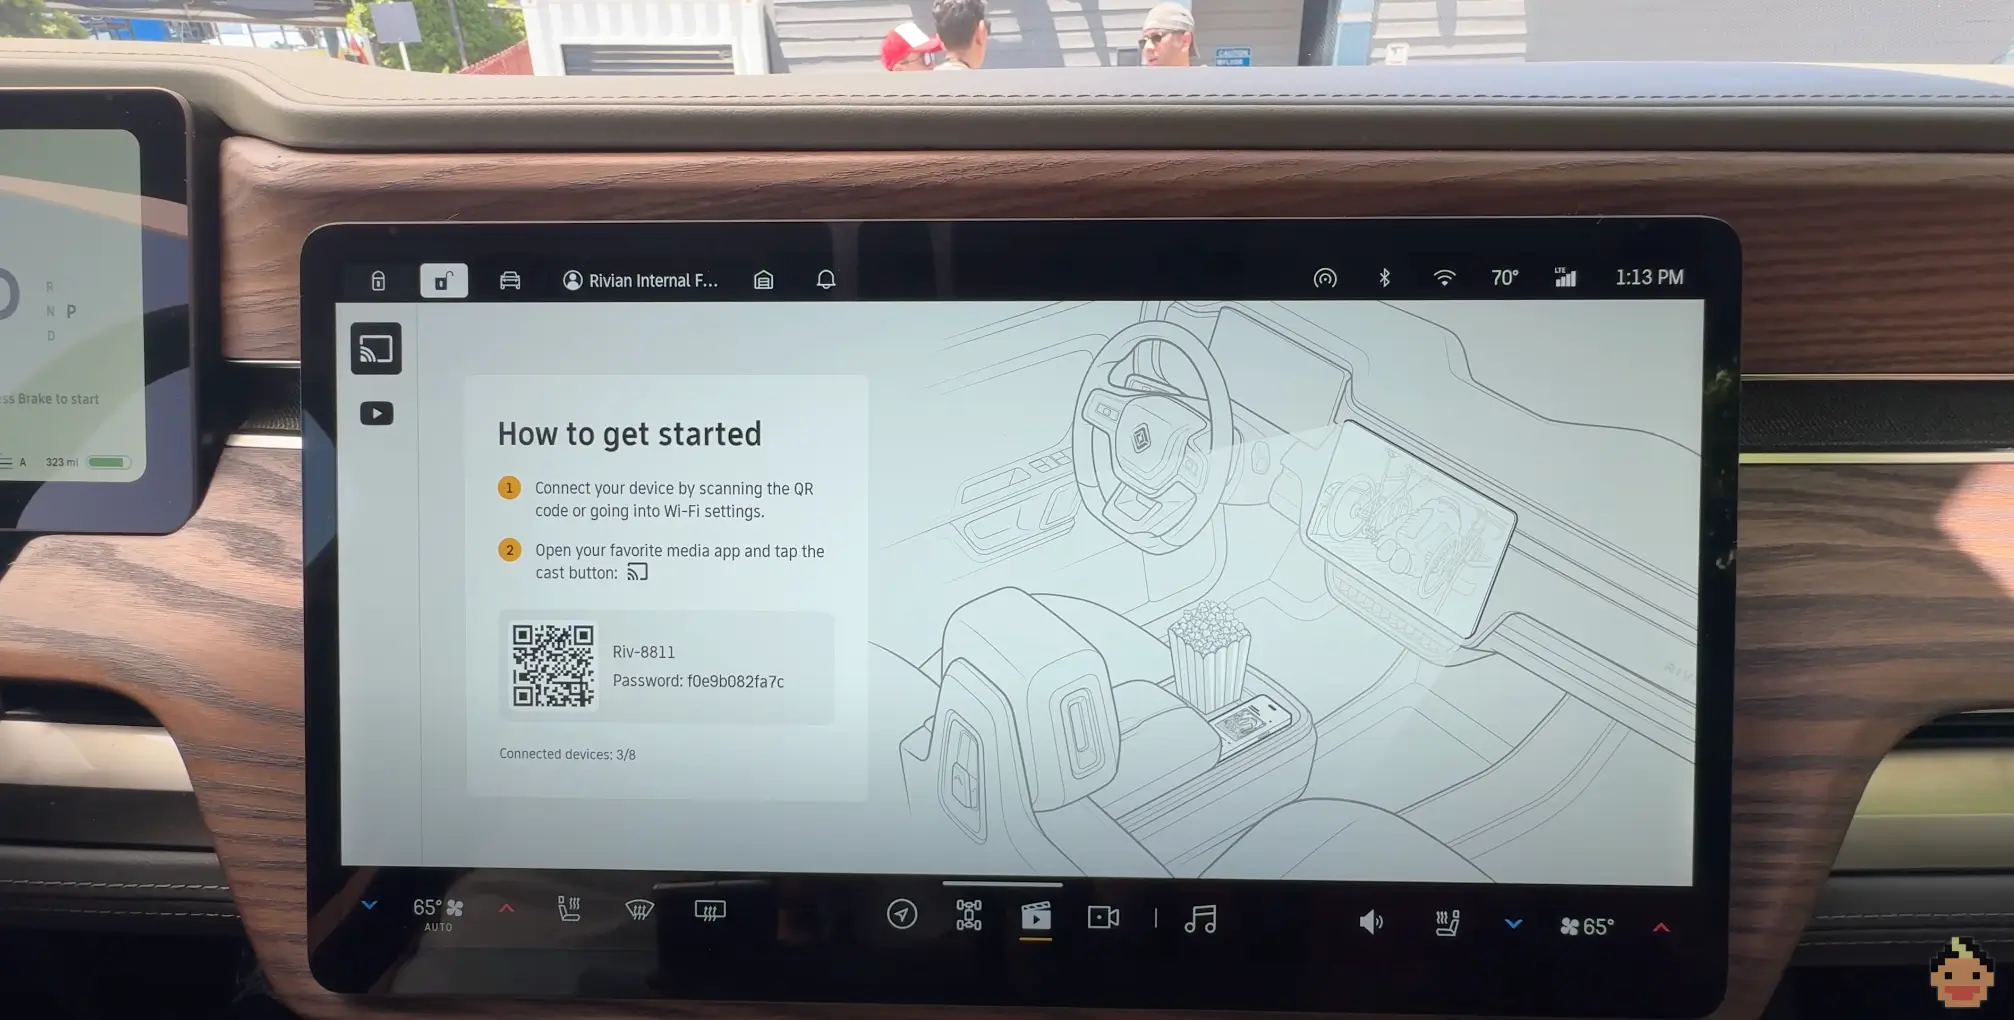 Screenshot of "How to get started" with Google Cast